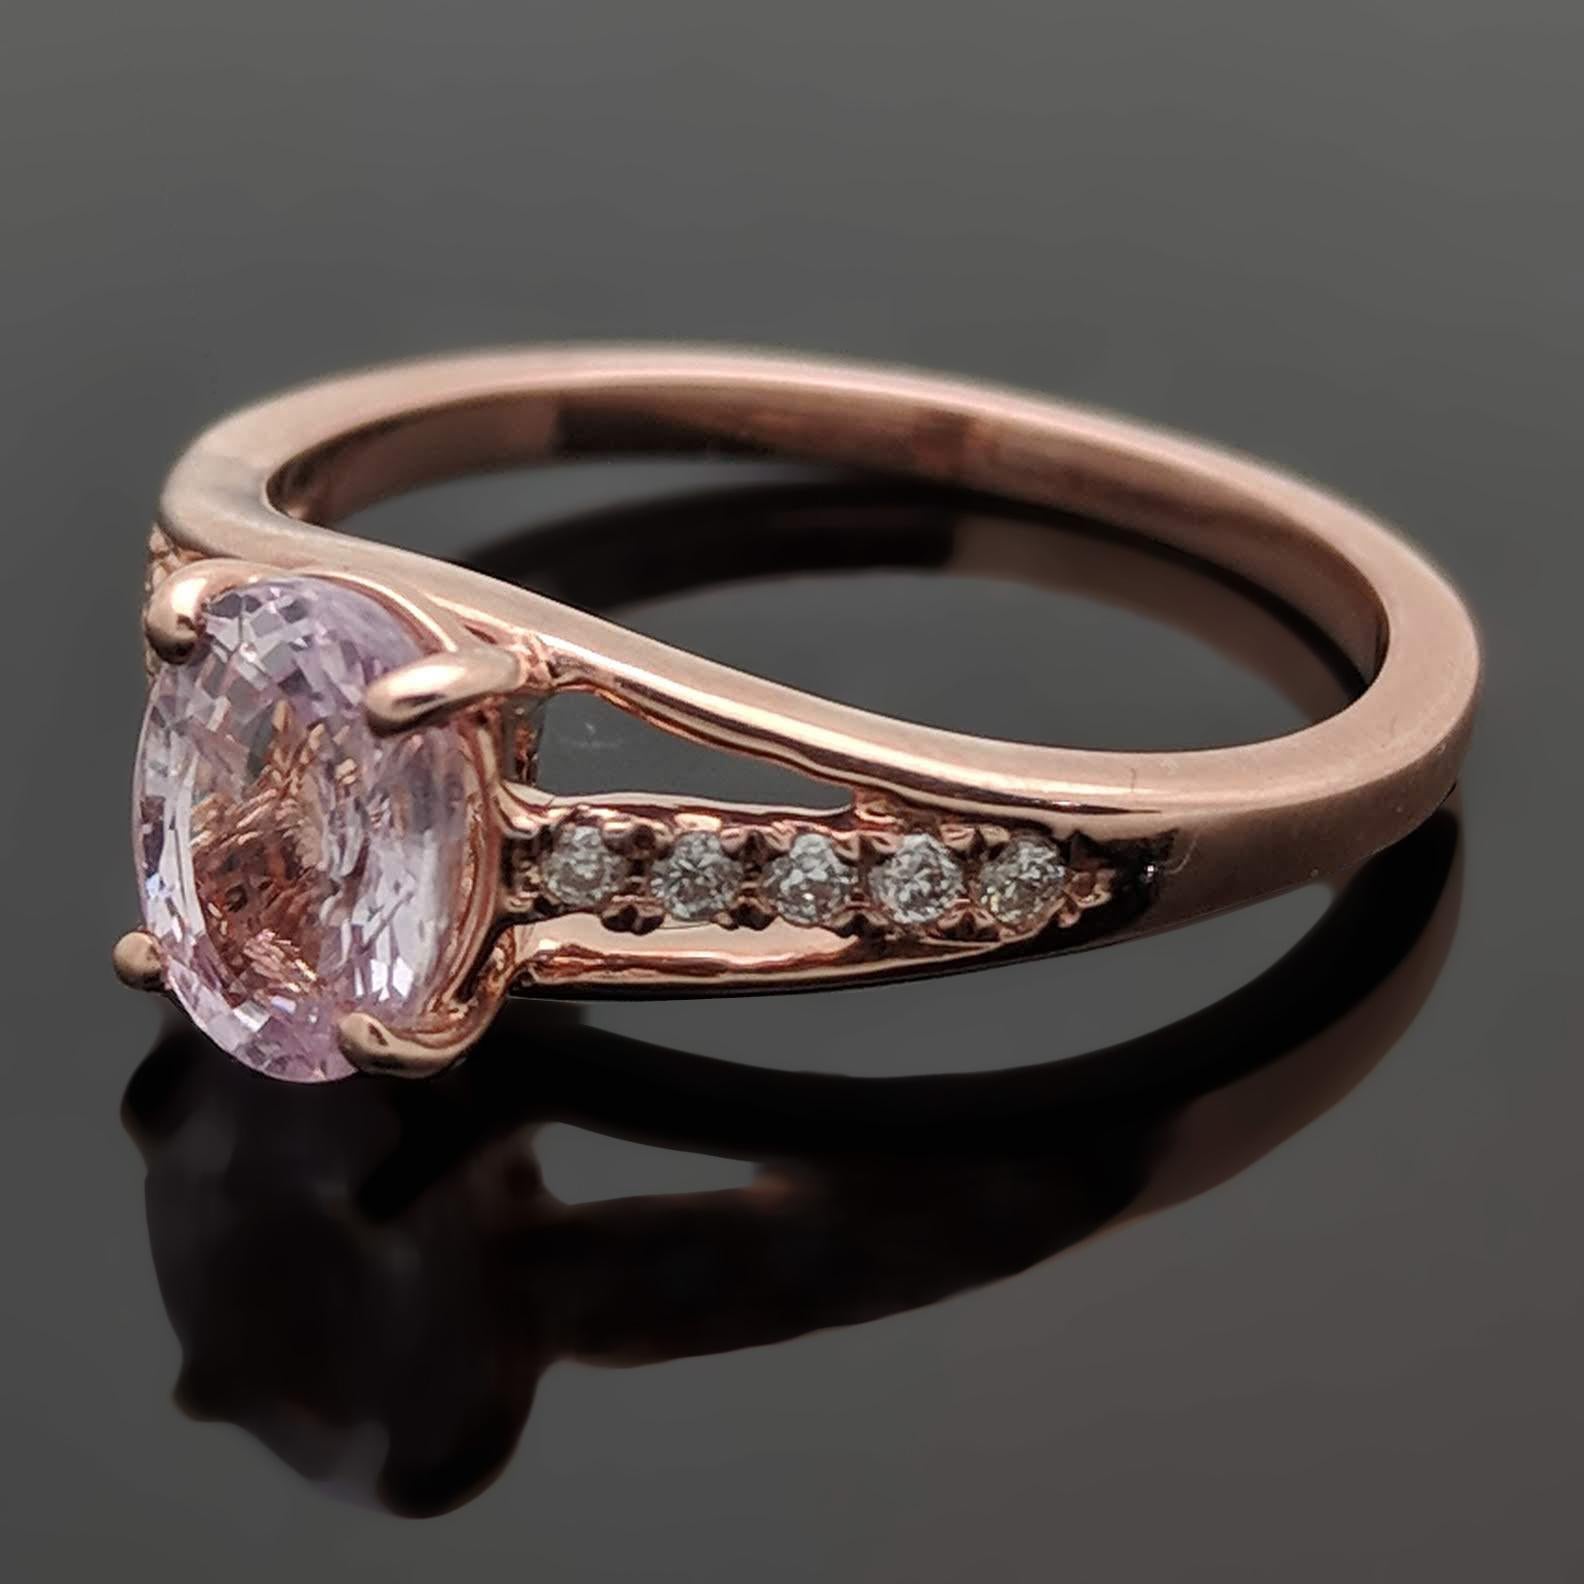 A 14kt rose gold ring featuring an oval cut pink sapphire estimated weight of 0.86ct. The sides feature a triple split band with small diamonds estimated at 0.04cttw. lining the center shank. Estimated weight of gold is 2.65 gr. 

We will size it